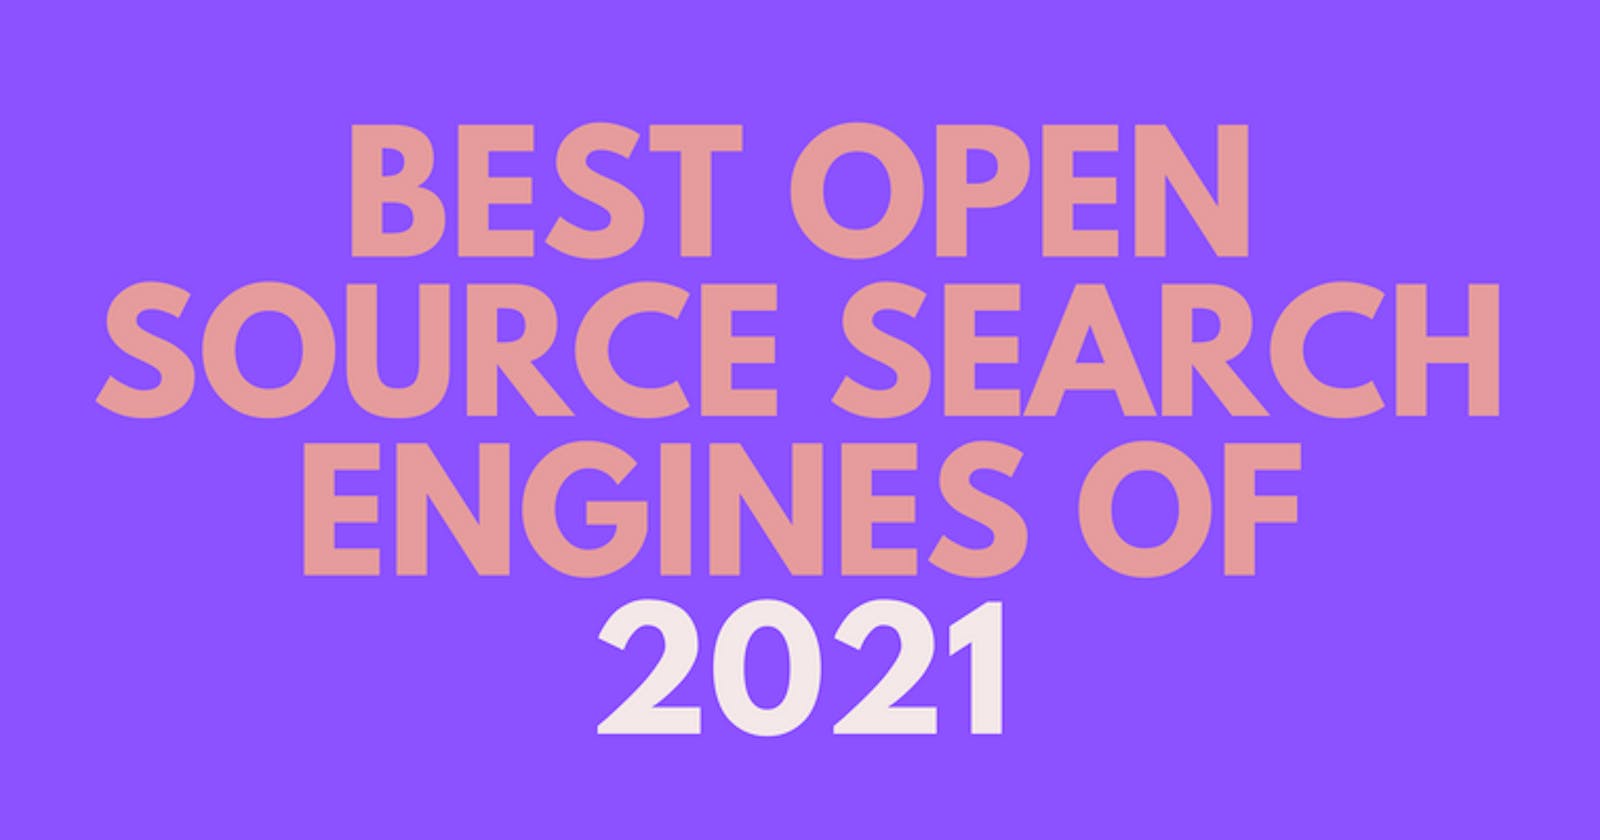 Best Open Source Search Engines of 2021